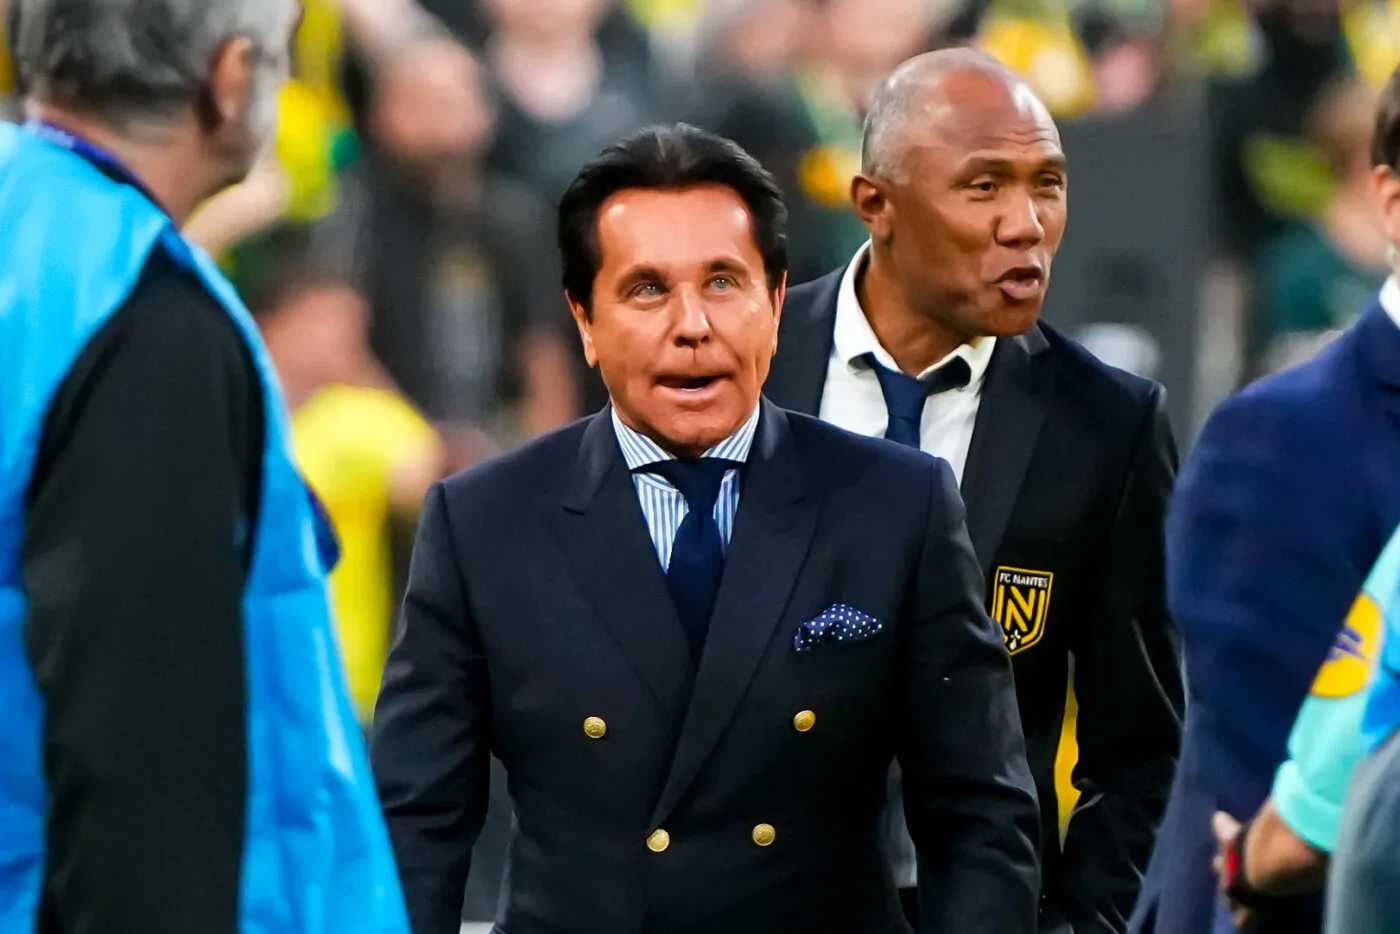 President Waldemar KITA of FC Nantes and Antoine KOMBOUARE of FC Nantes during the French Cup, final match between Nice and Nantes on May 7, 2022 in Paris, France. (Photo by Hugo Pfeiffer/Icon Sport)   - Photo by Icon Sport